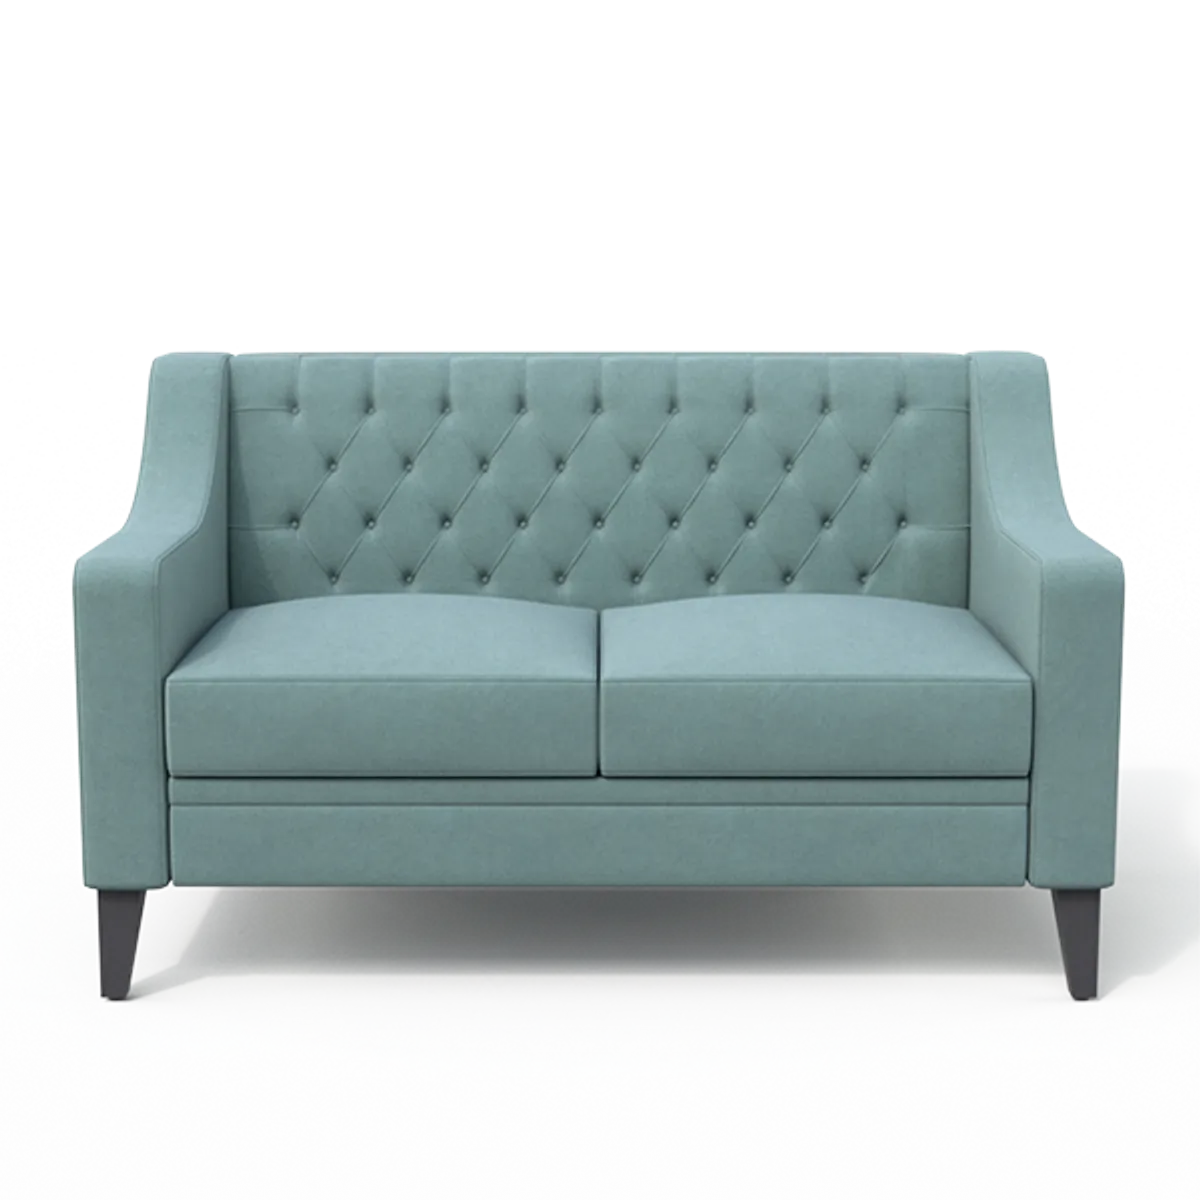 Lobby 1 Sofa 010 By Inside Out Contracts